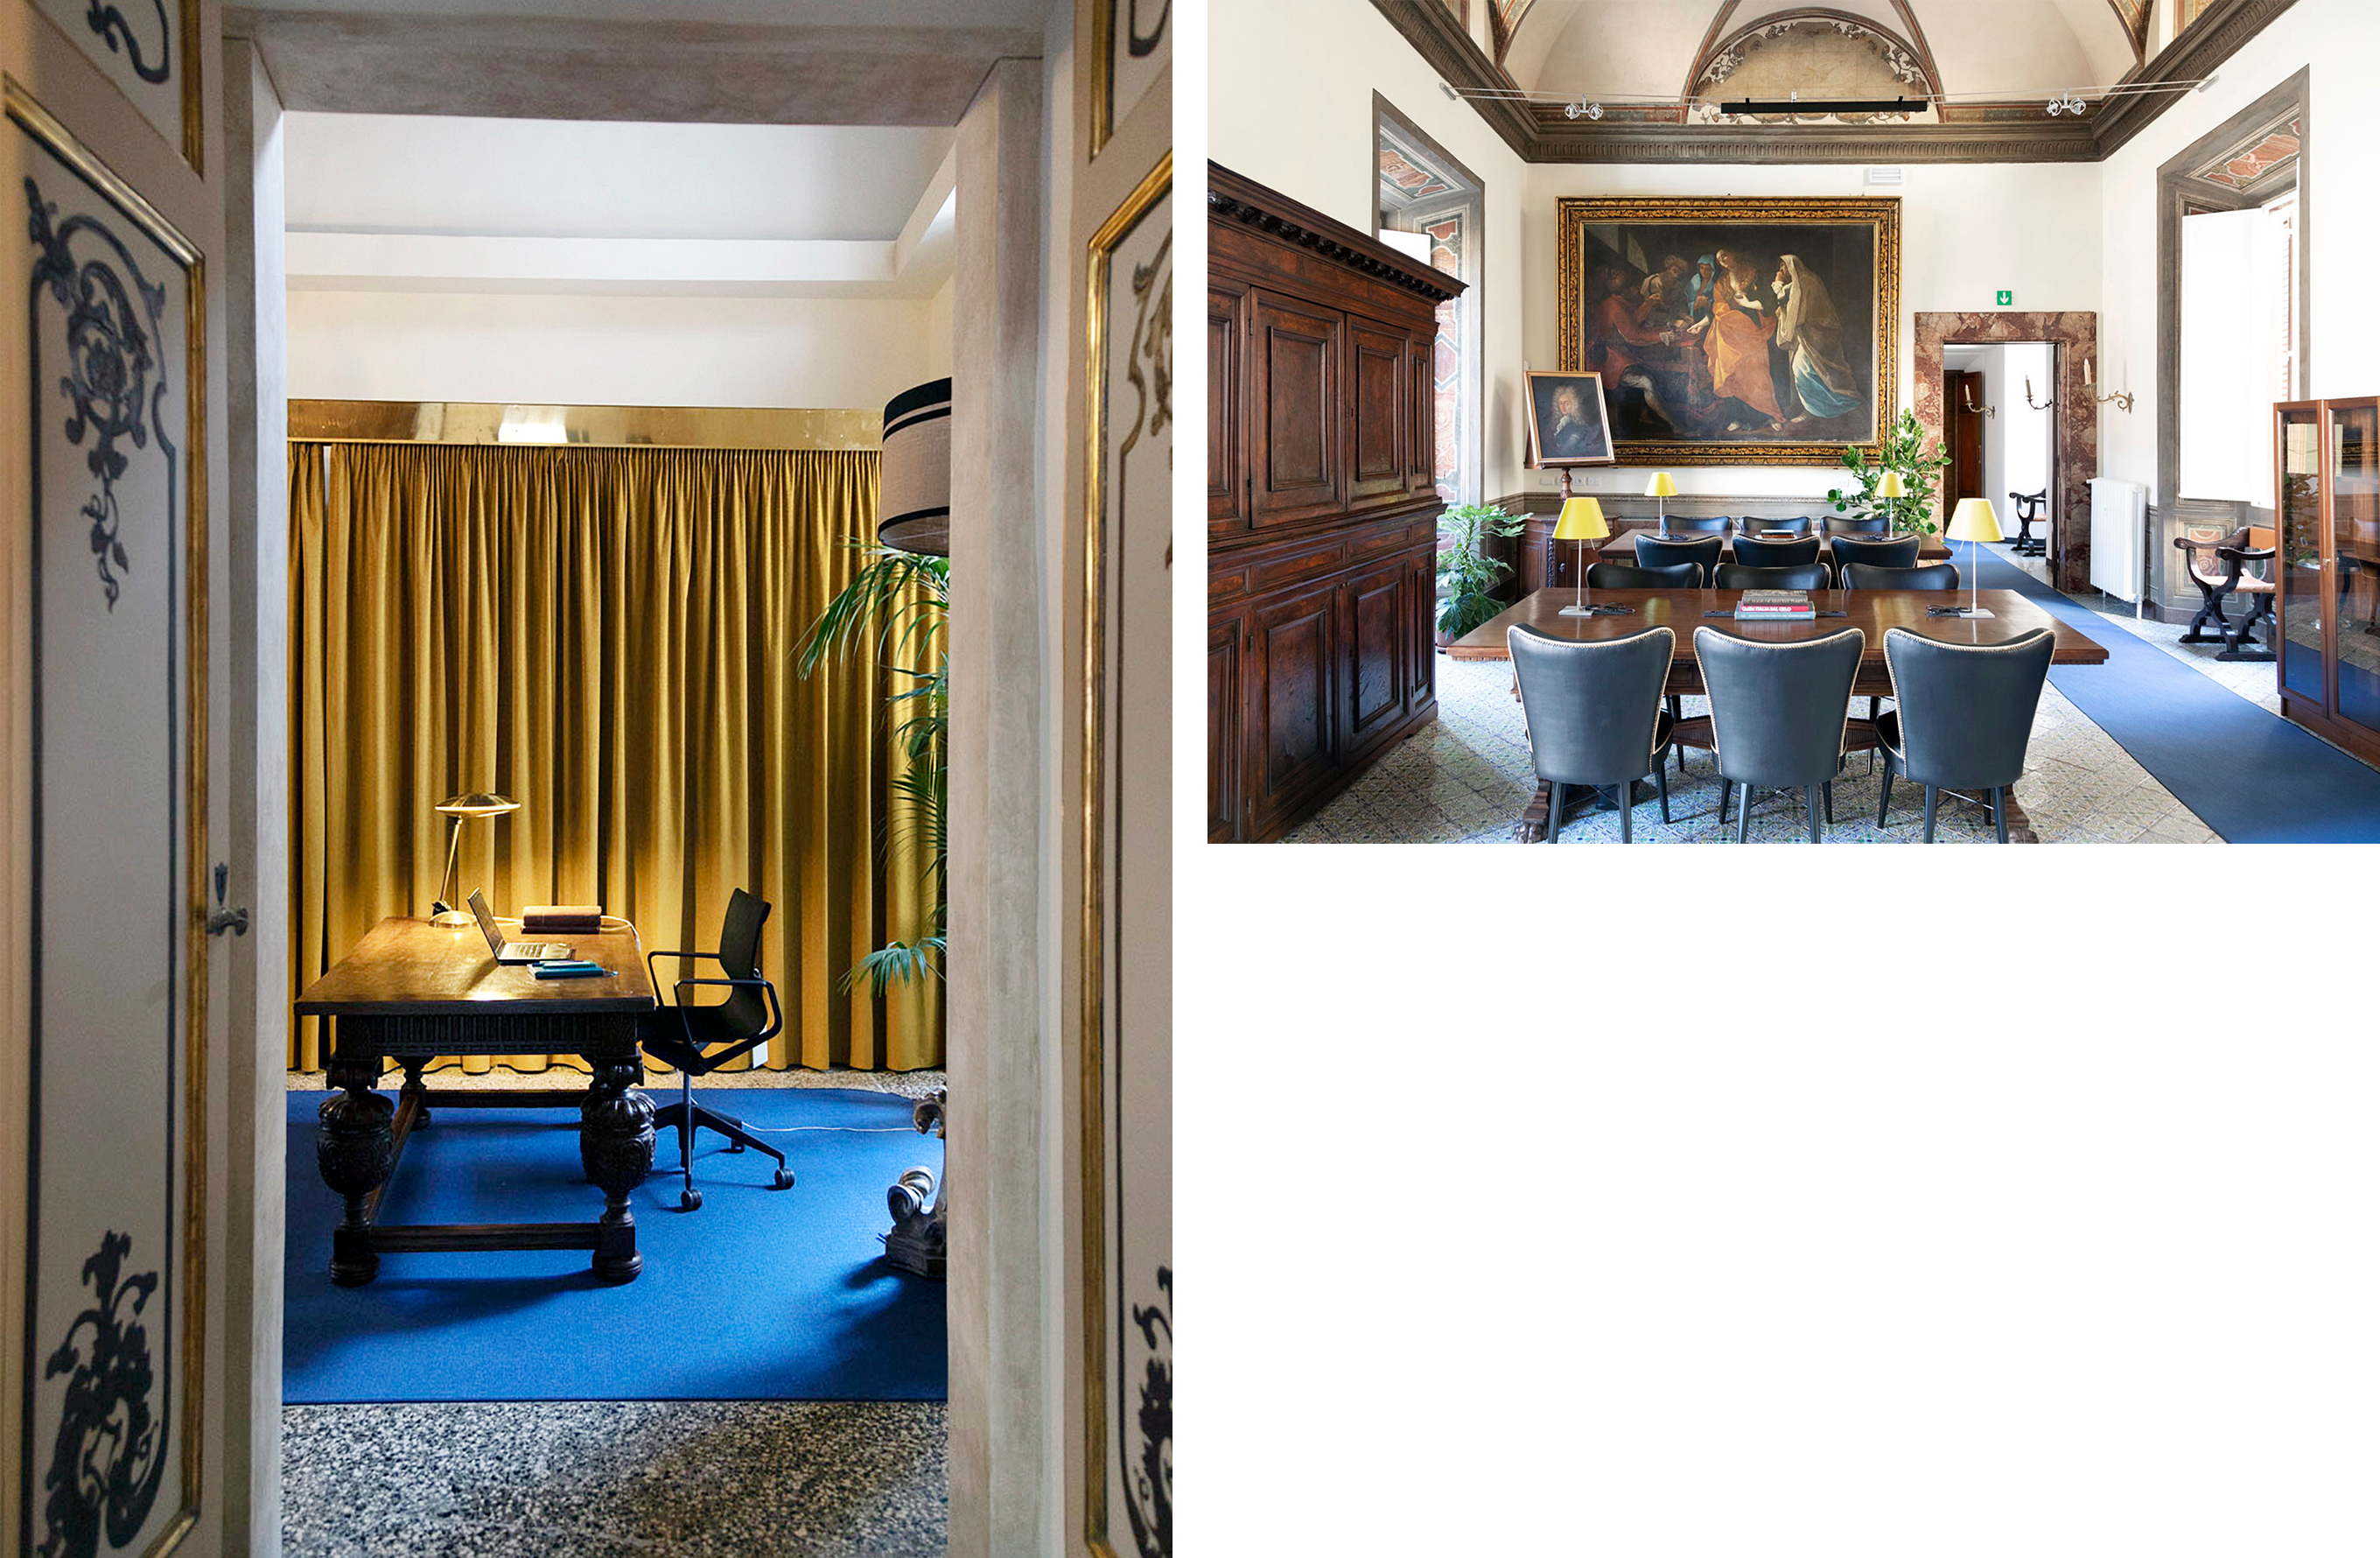 Two images side by side of a restored Roman palazzo